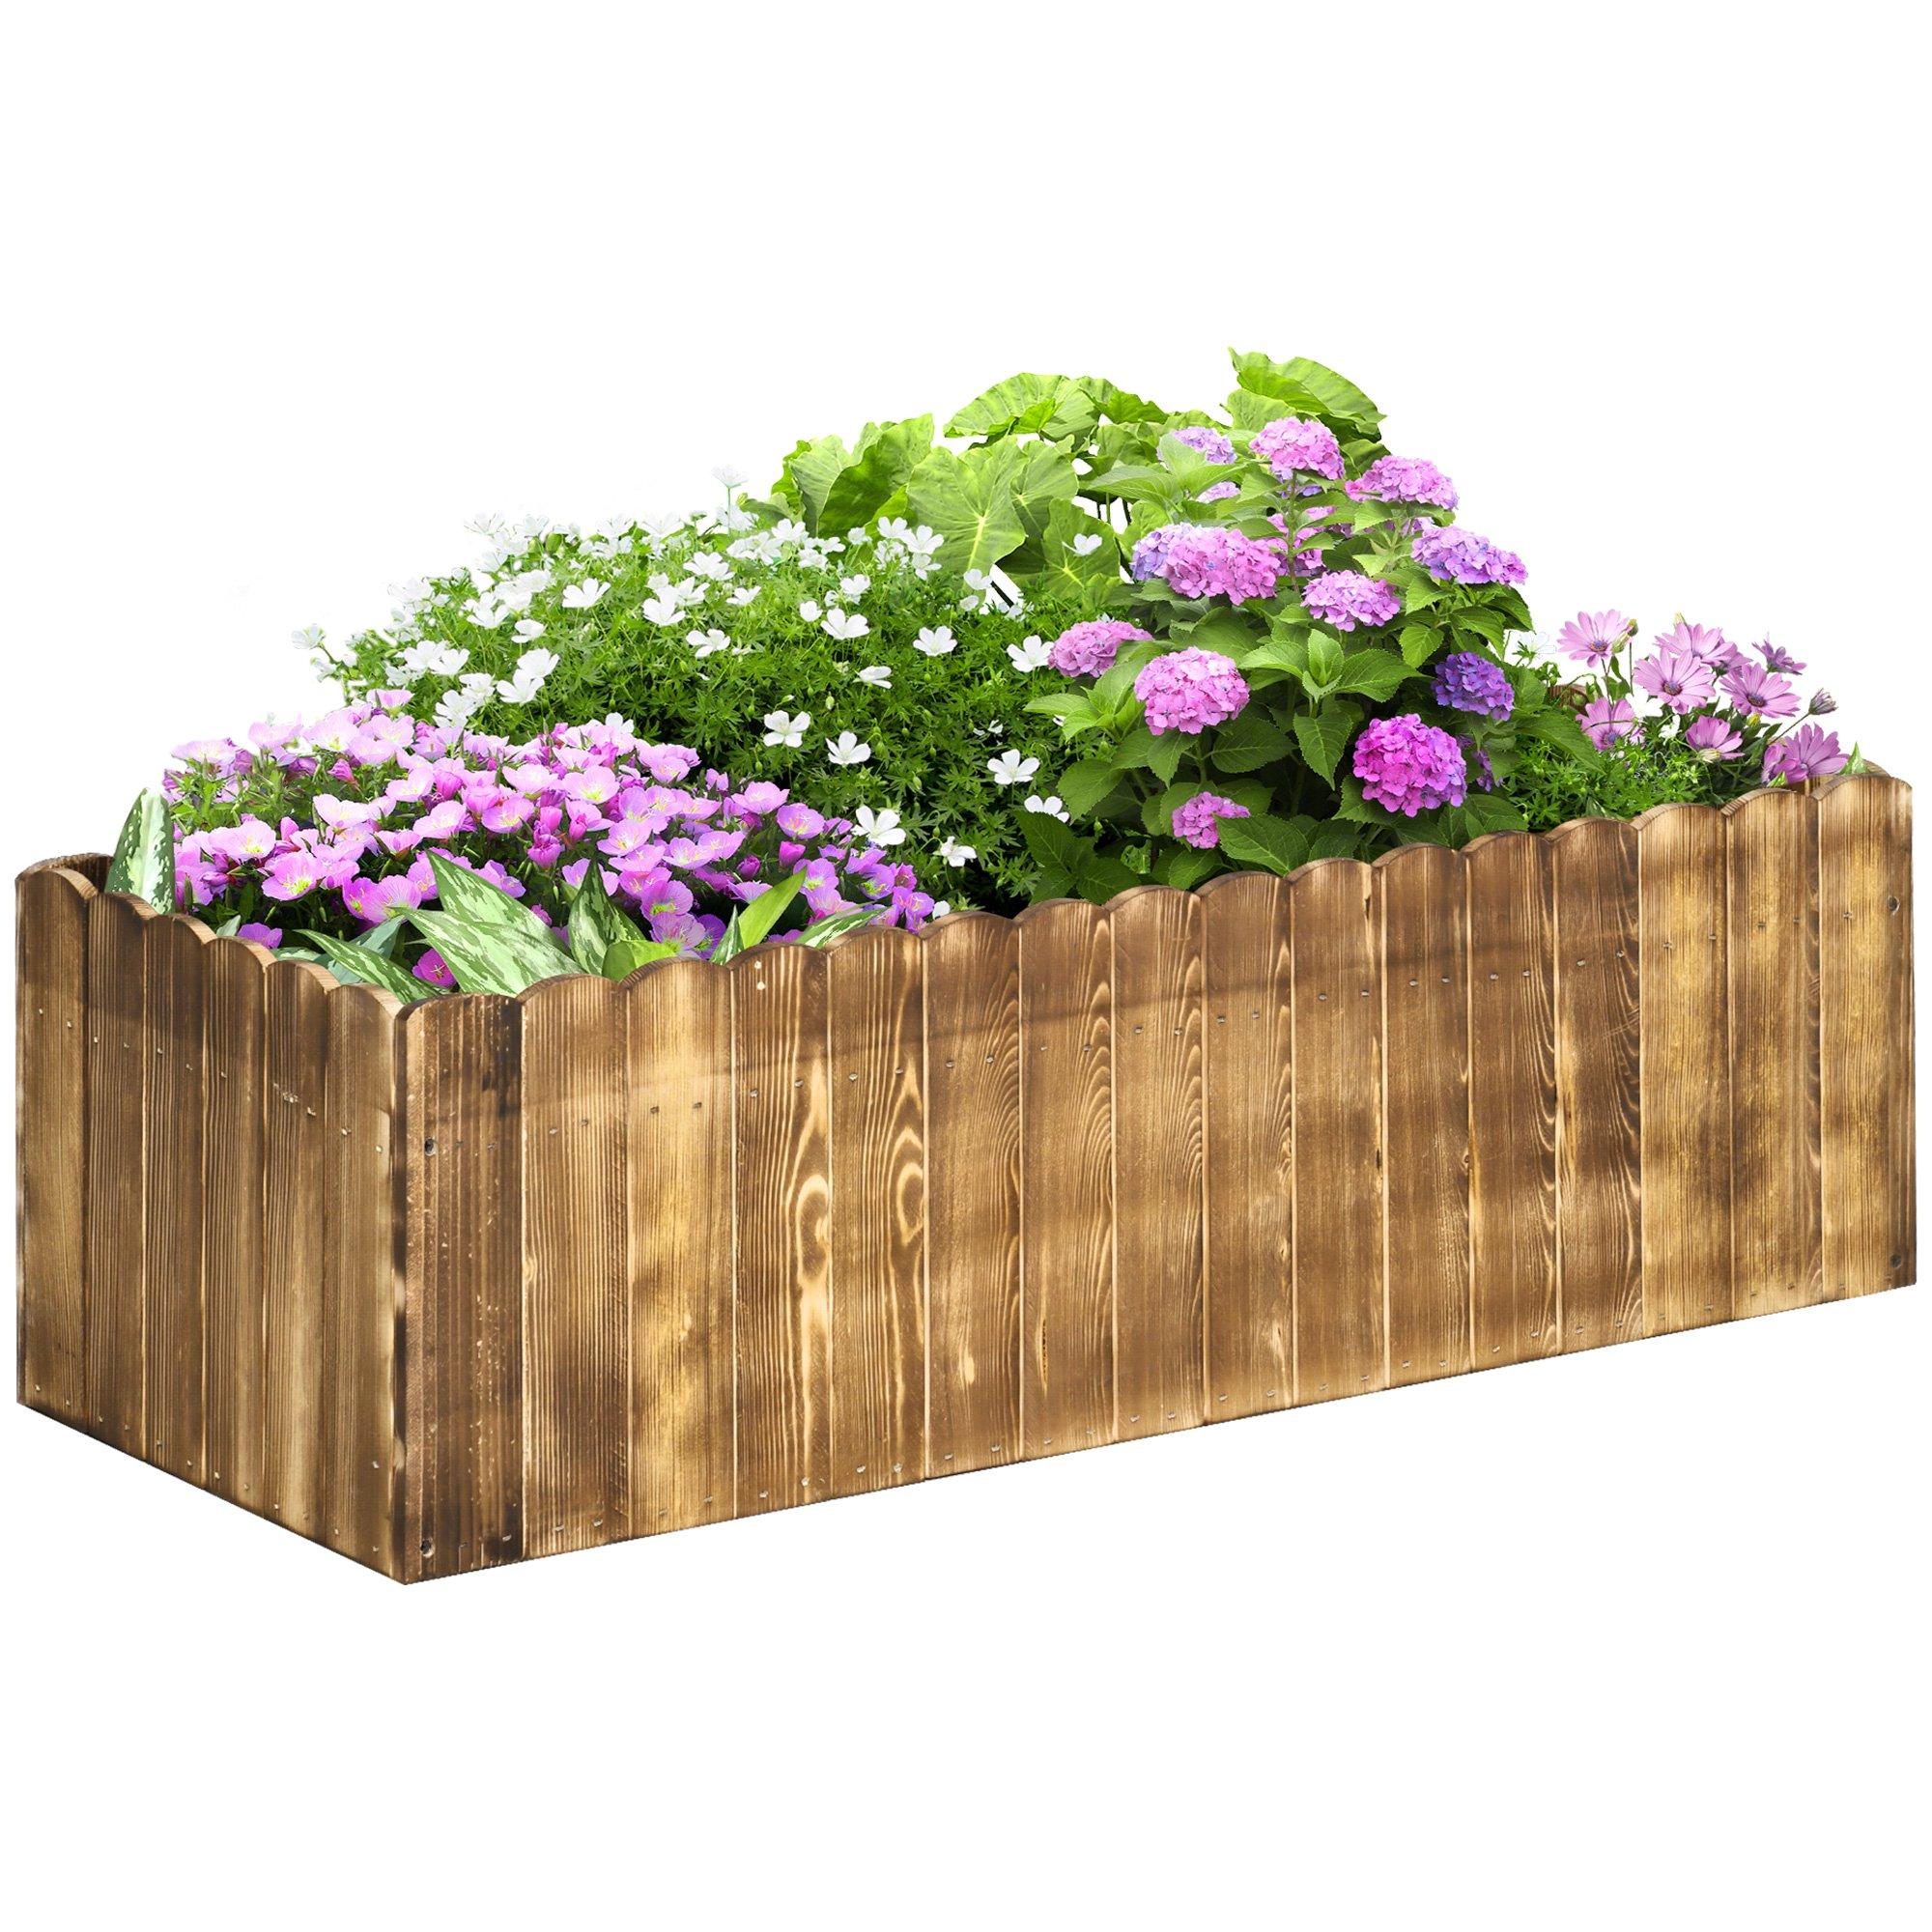 Raised Flower Bed Garden Container Box Planter Display Wood